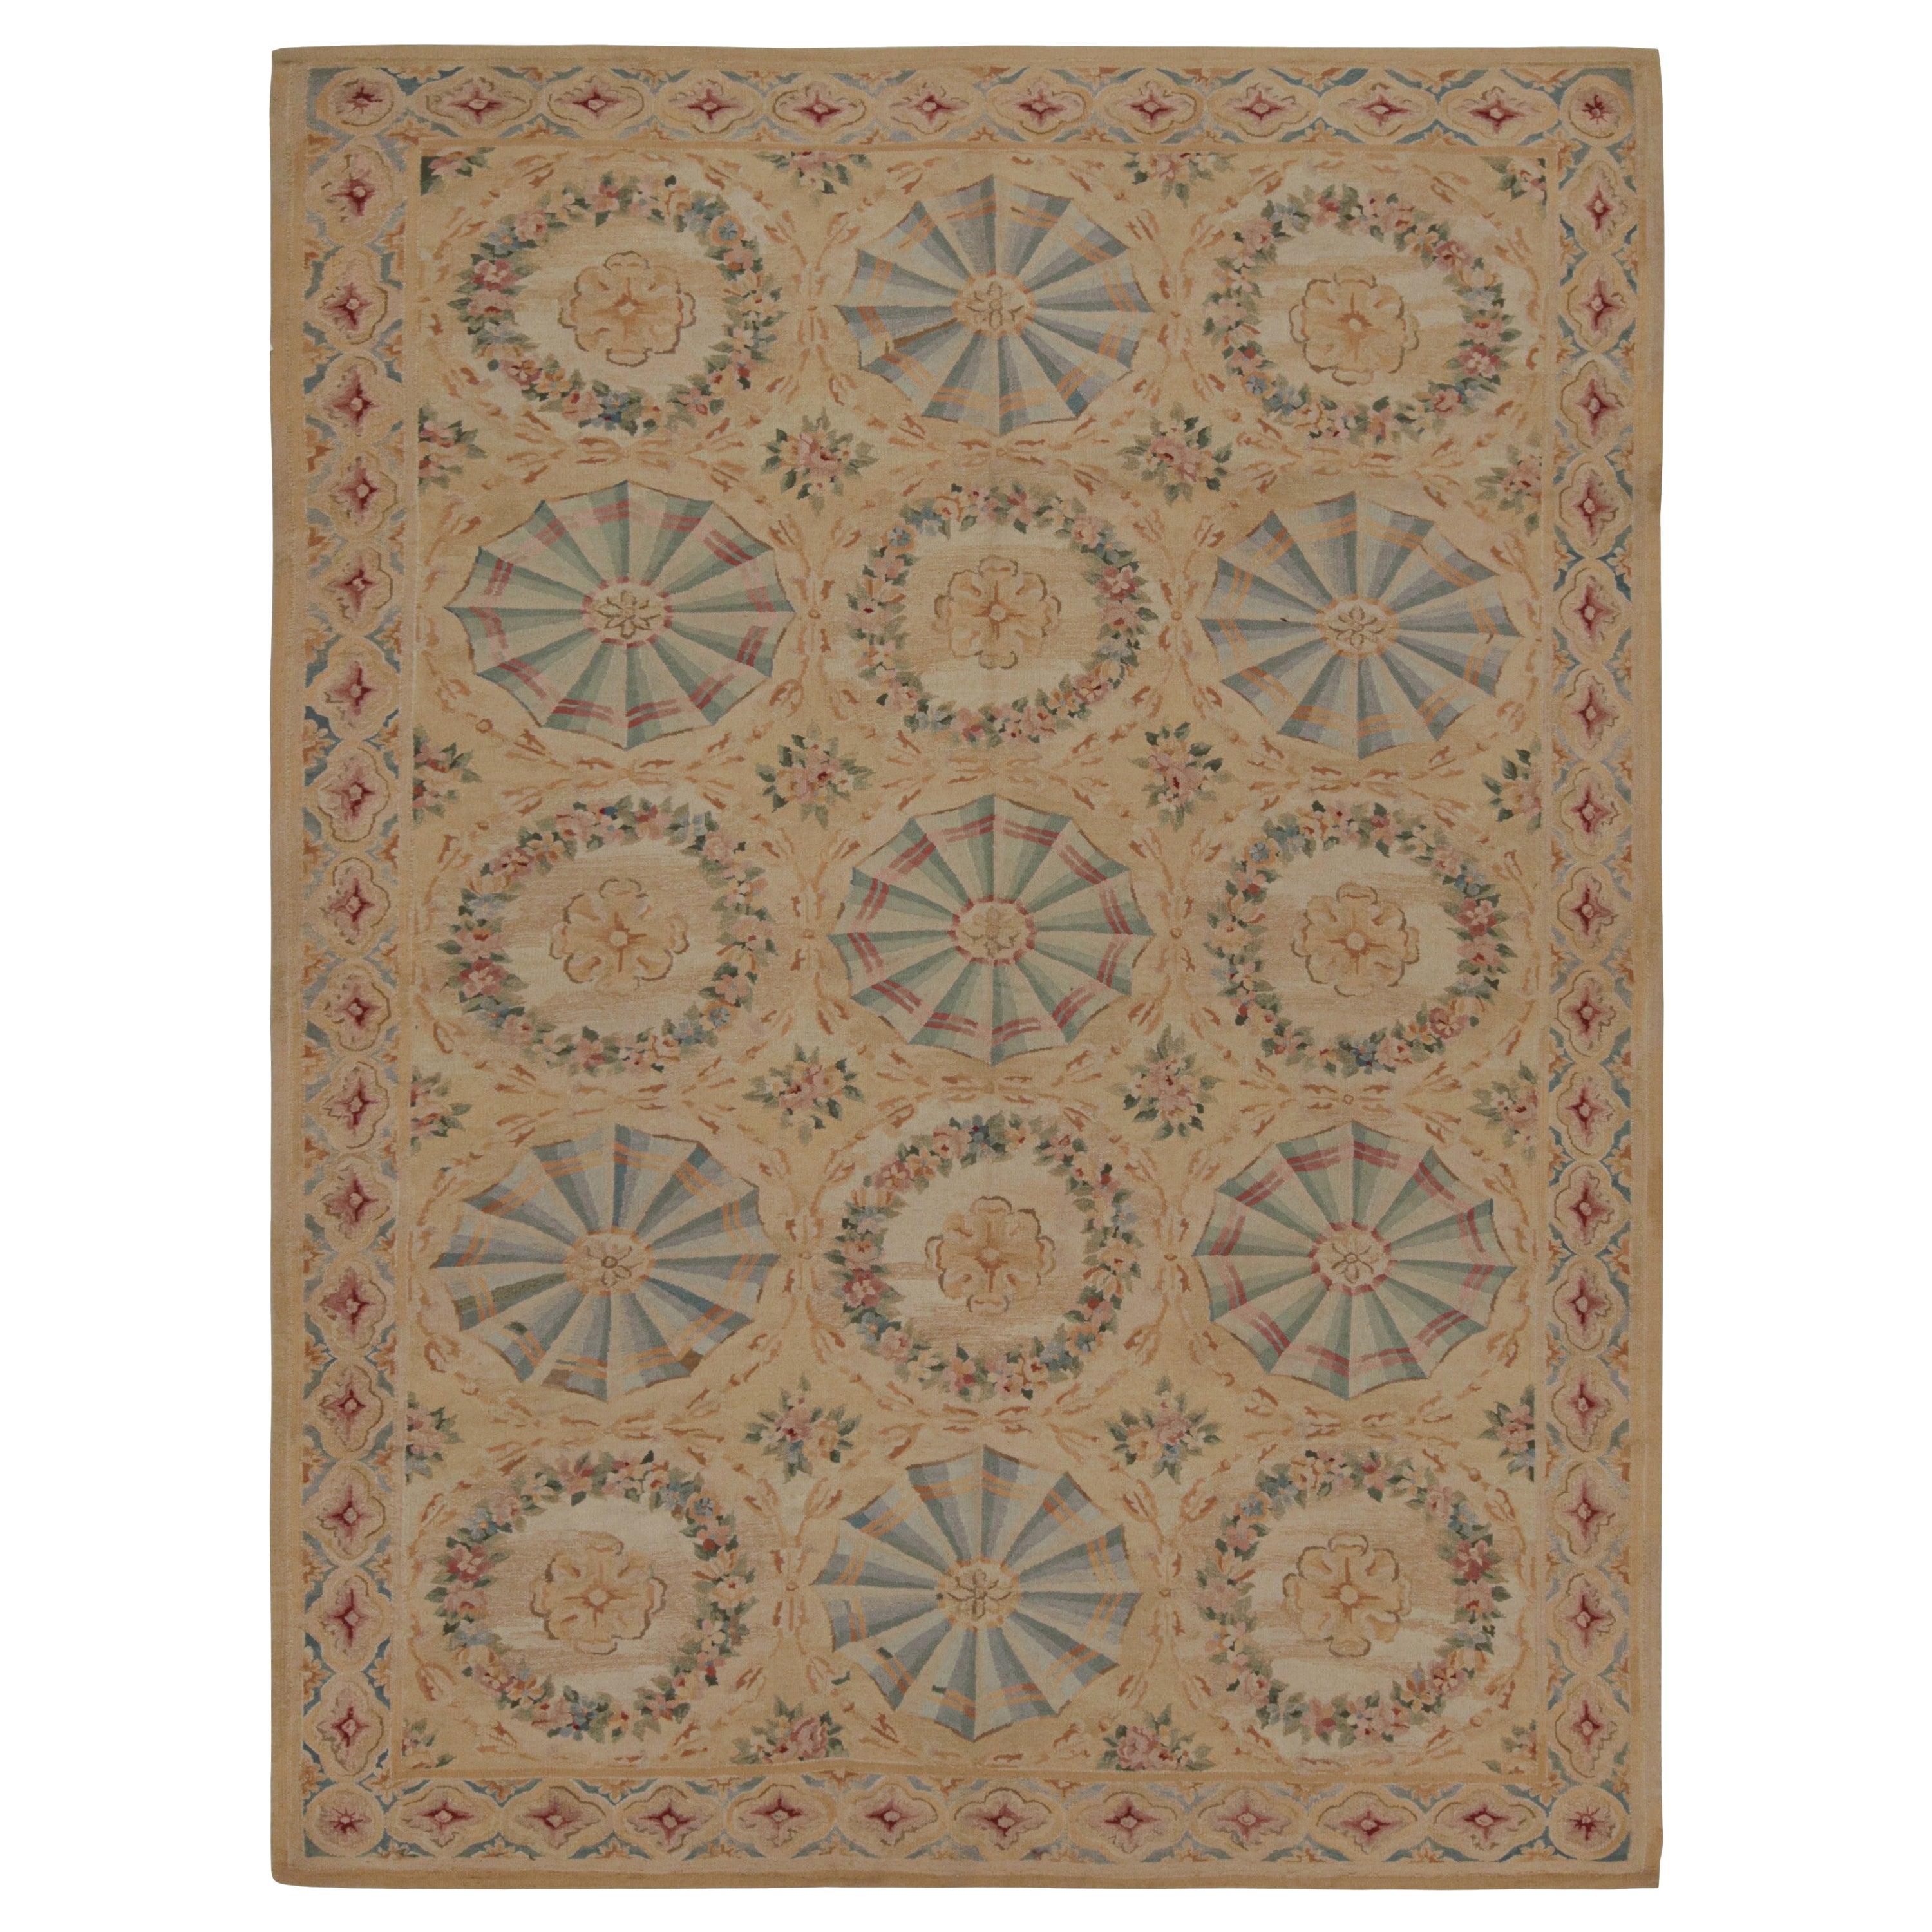 Rug & Kilim’s Aubusson Style Flatweave Rug with Floral Patterns and Medallions For Sale